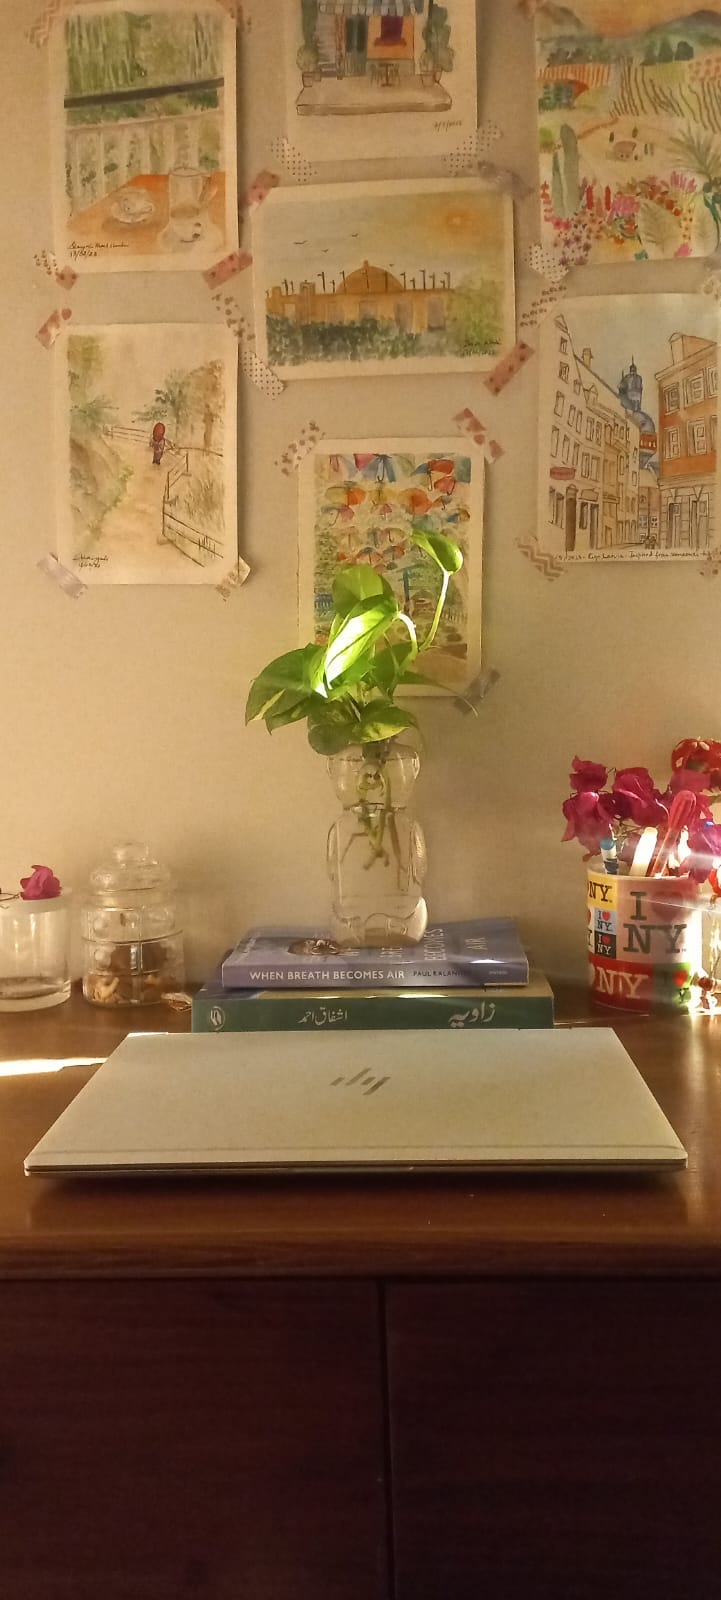 Sunlit, cozy homework space. The worktable on which a plant is set up over a few books, a laptop is resting, and a few jars of nuts and a pen holder. Sun lights are creating a spectacular show.